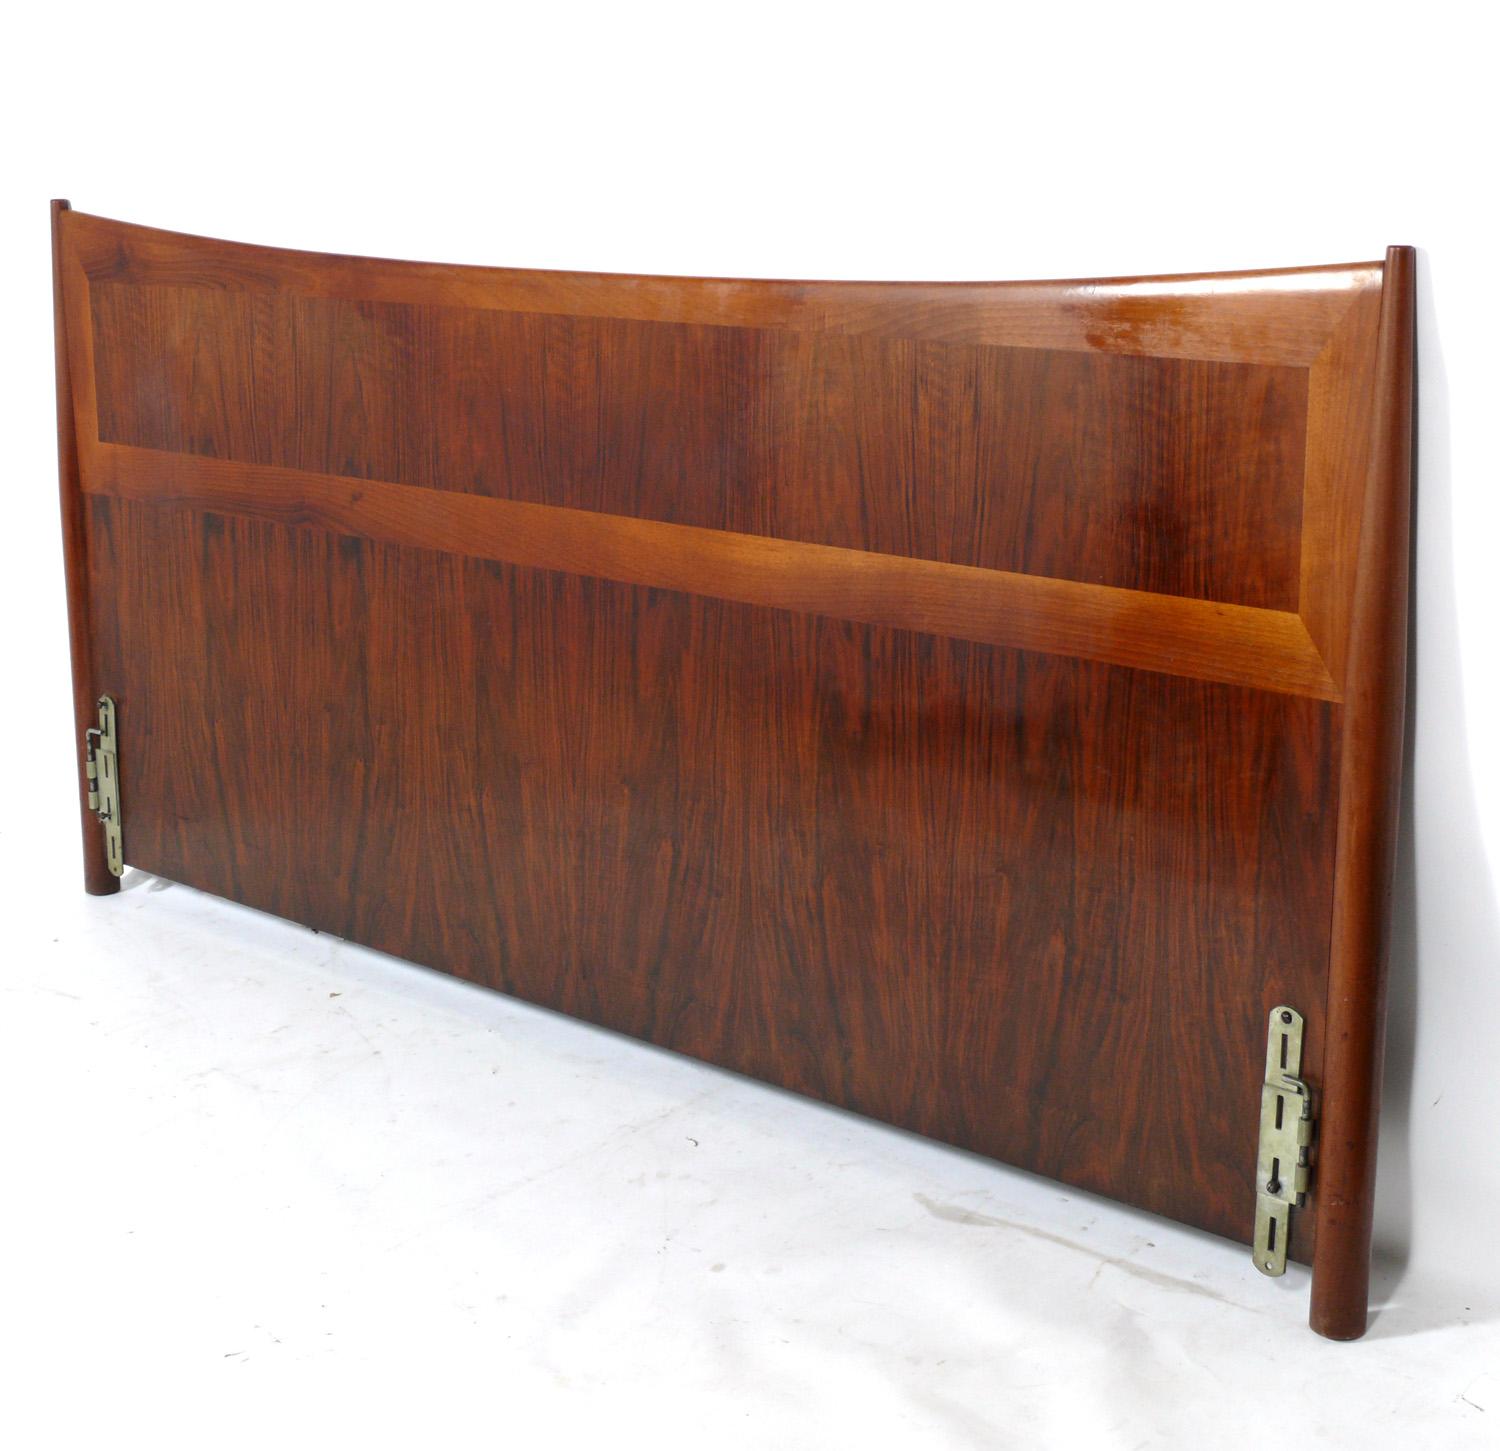 Danish modern walnut king size headboard, Denmark, circa 1960s. Beautiful graining to the wood. It has been cleaned and Danish oiled. Connects to most standard Hollywood frames.